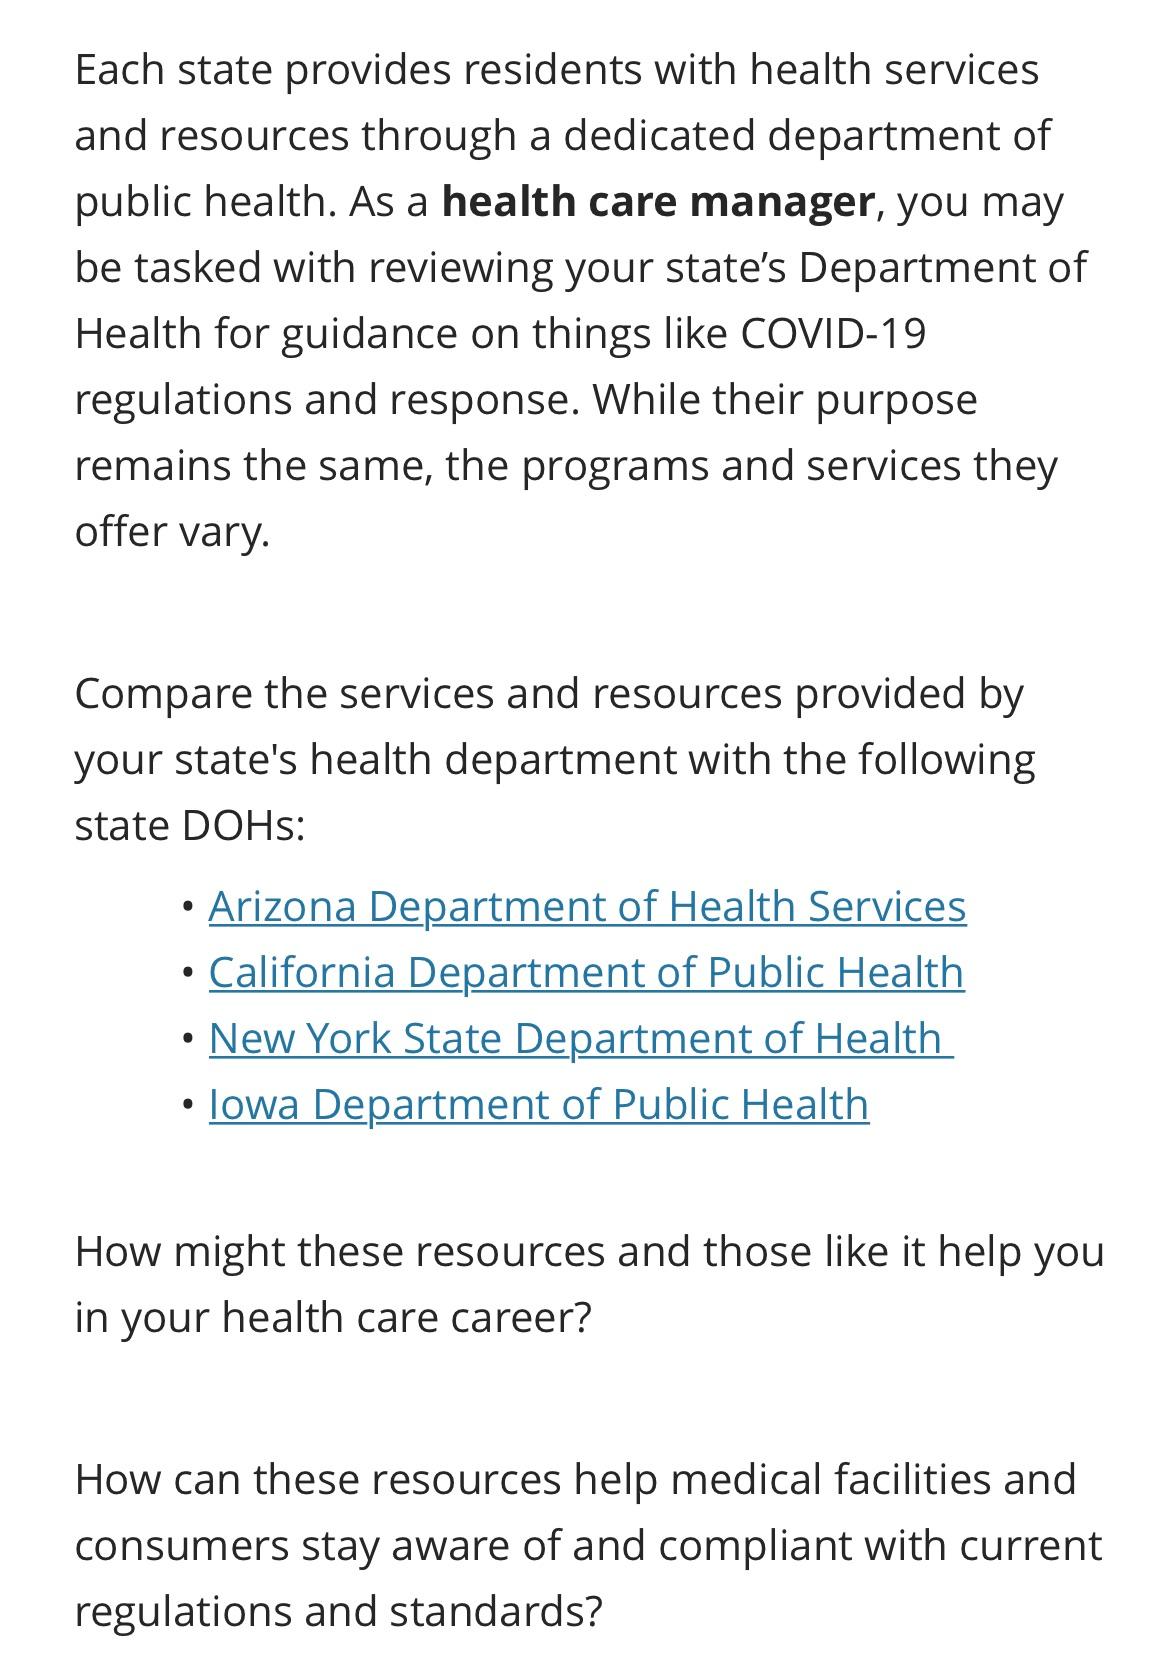 Each state provides residents with health services and resources through a dedicated department of public